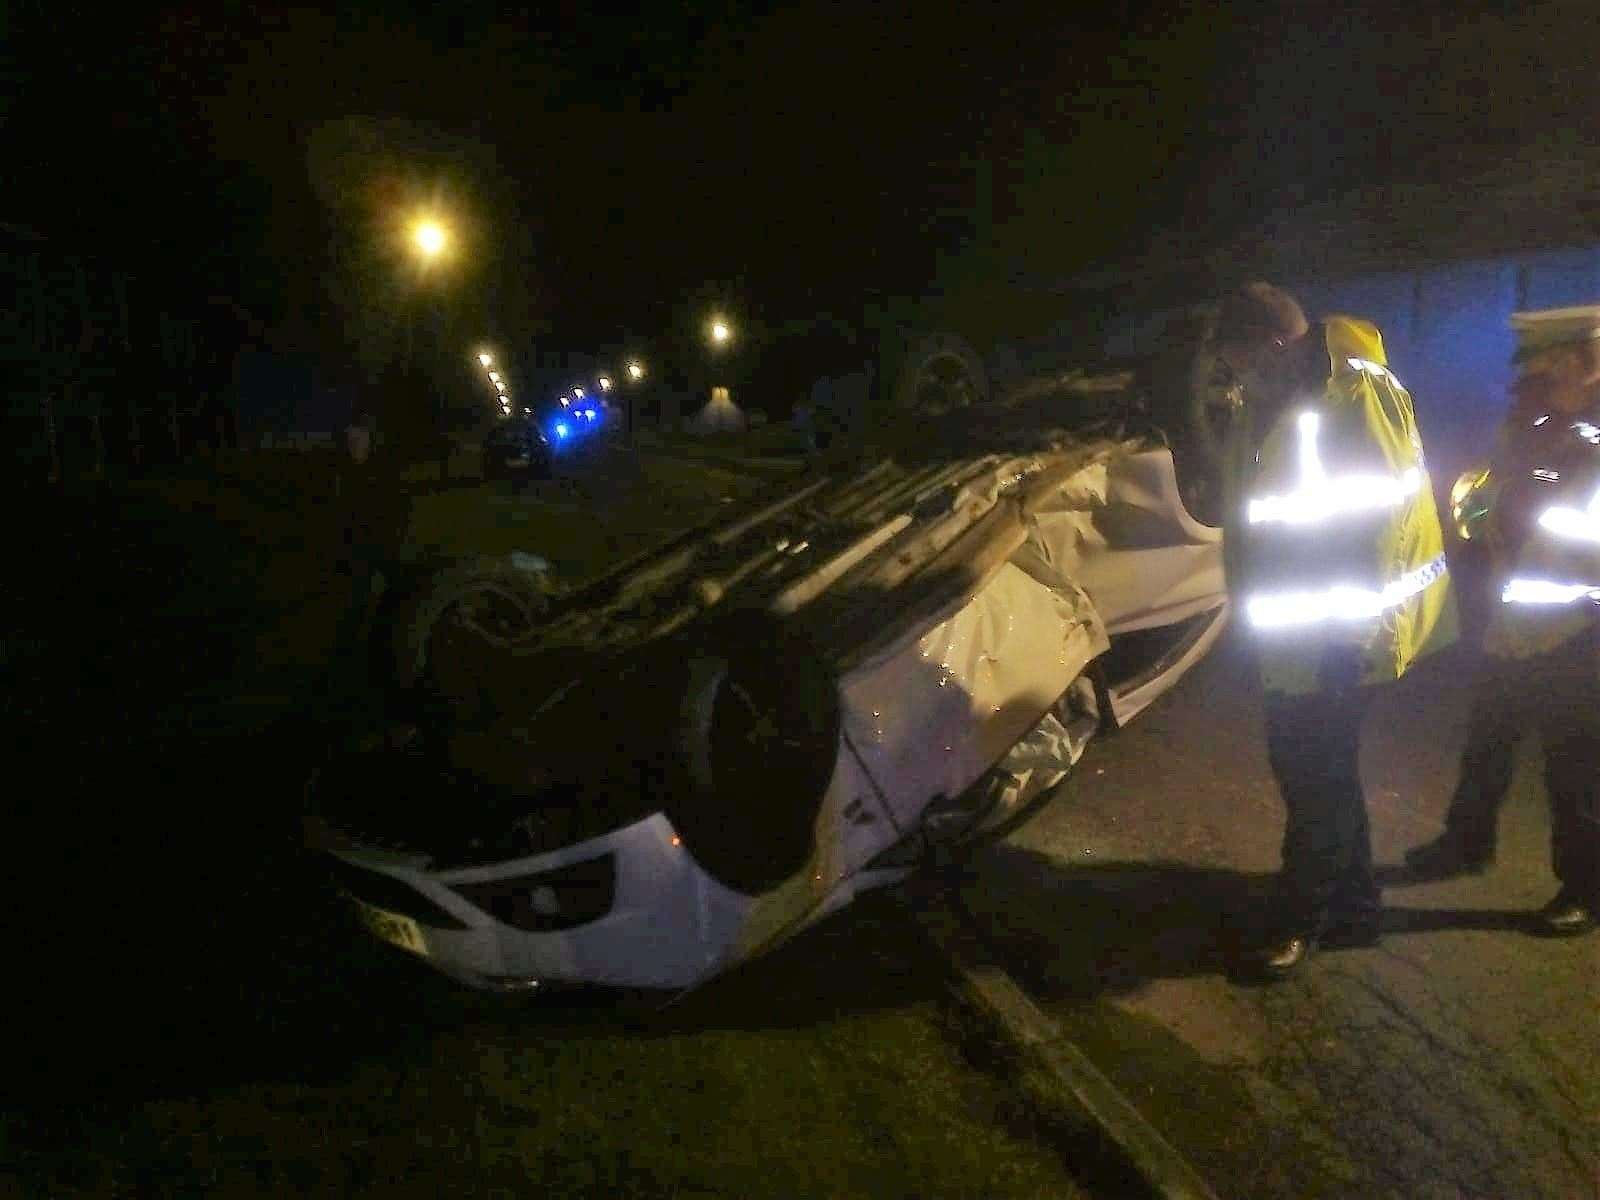 The car ended up on its roof in Lybster.